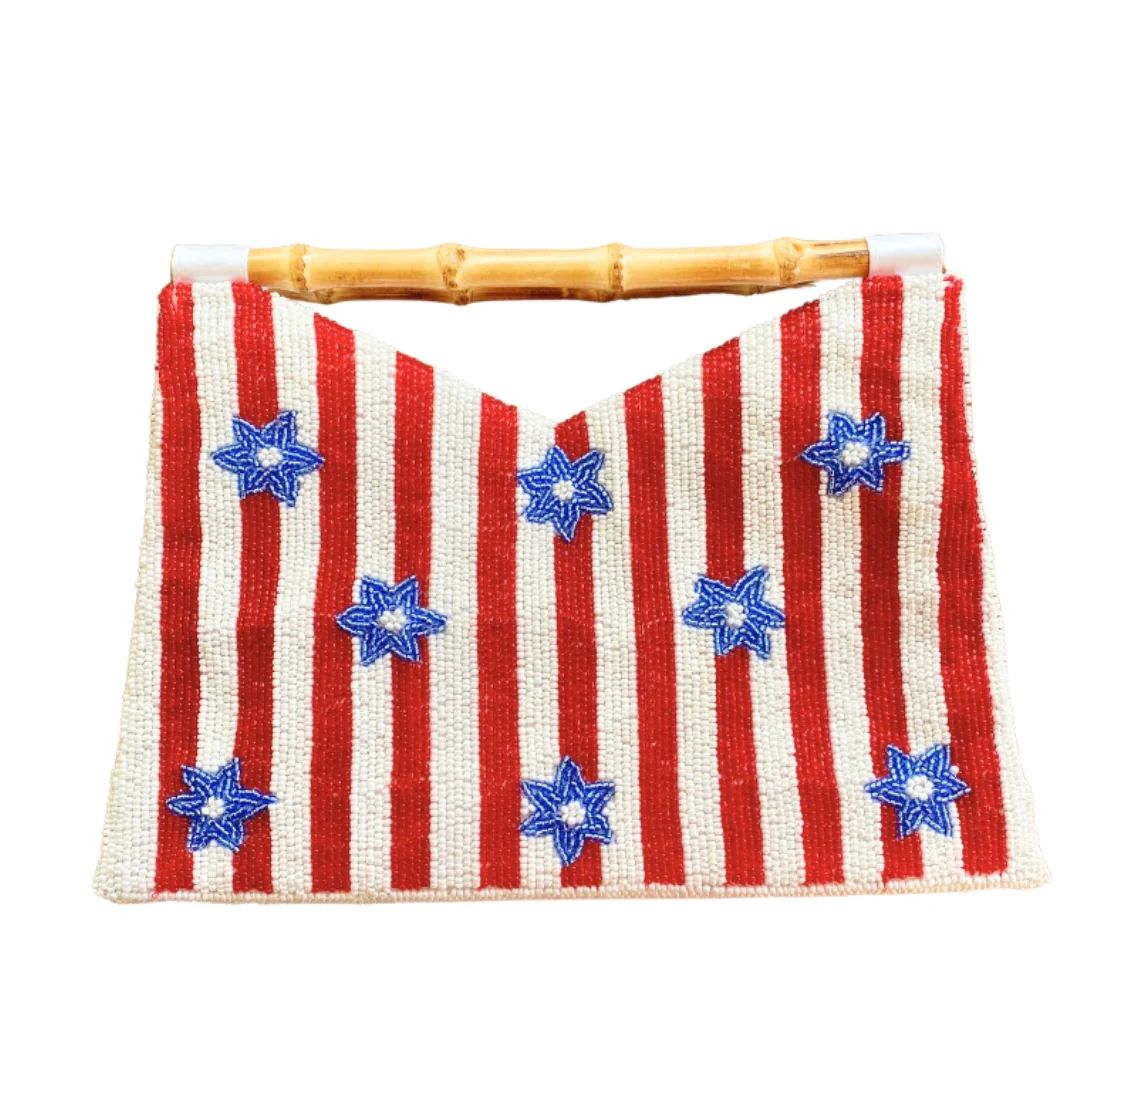 Bamboo Handle Clutch in Red, White and Blue | Beth Ladd Collections